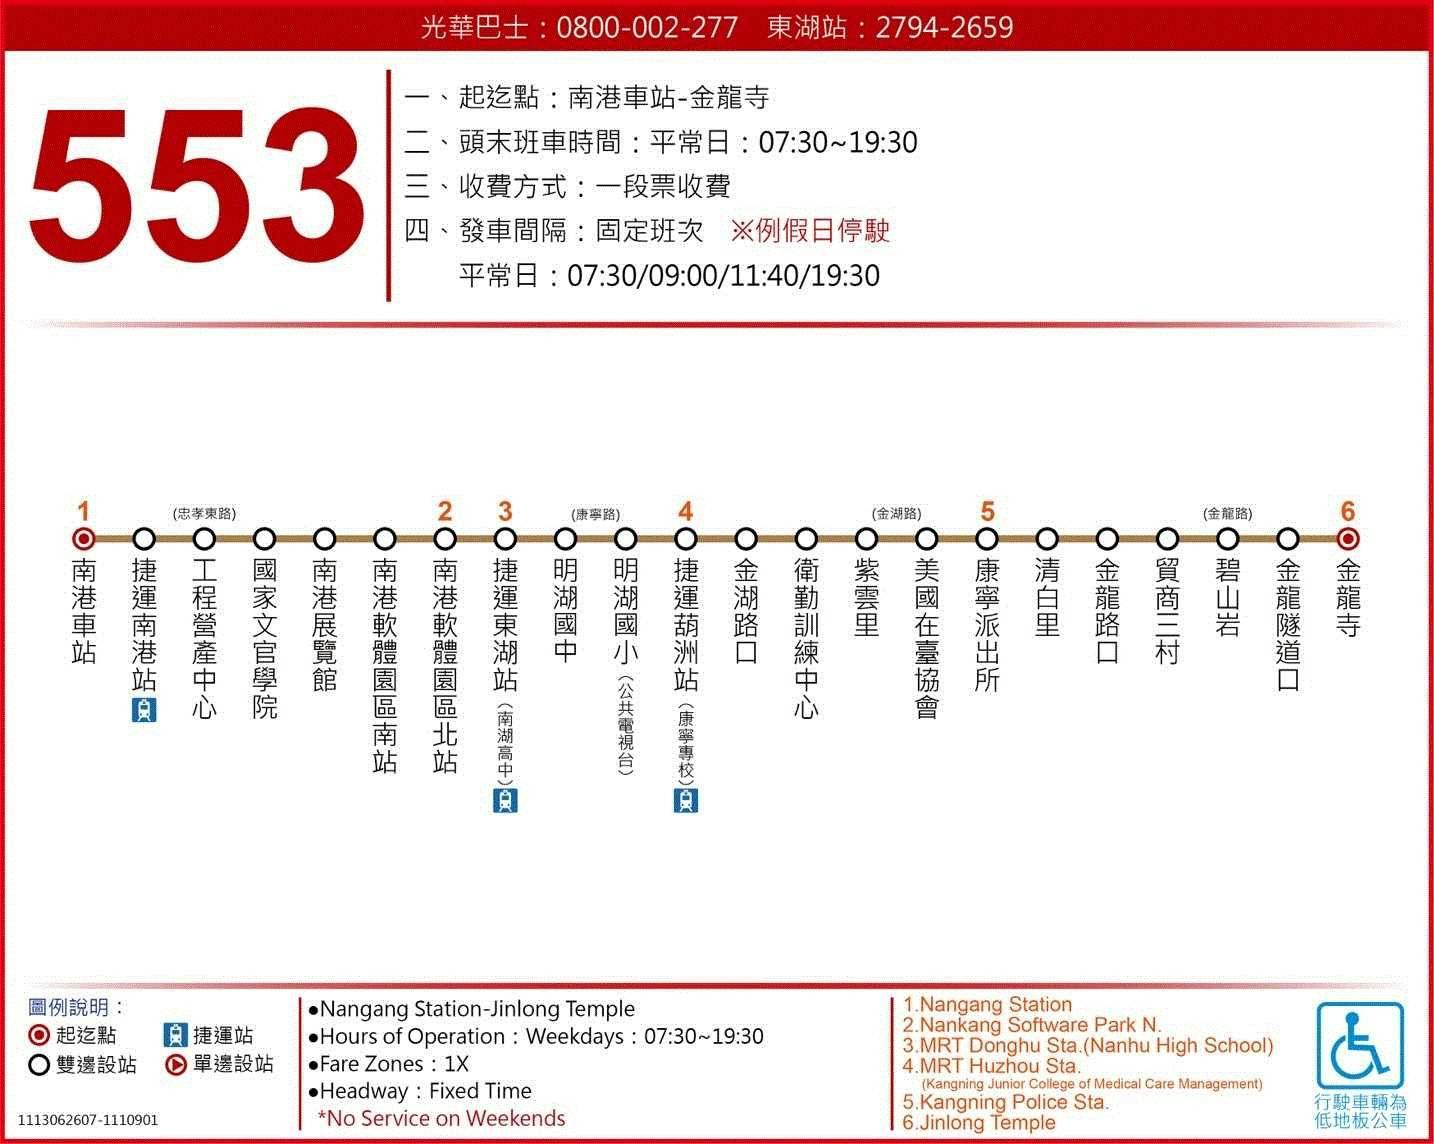 553Route Map-台北市 Bus